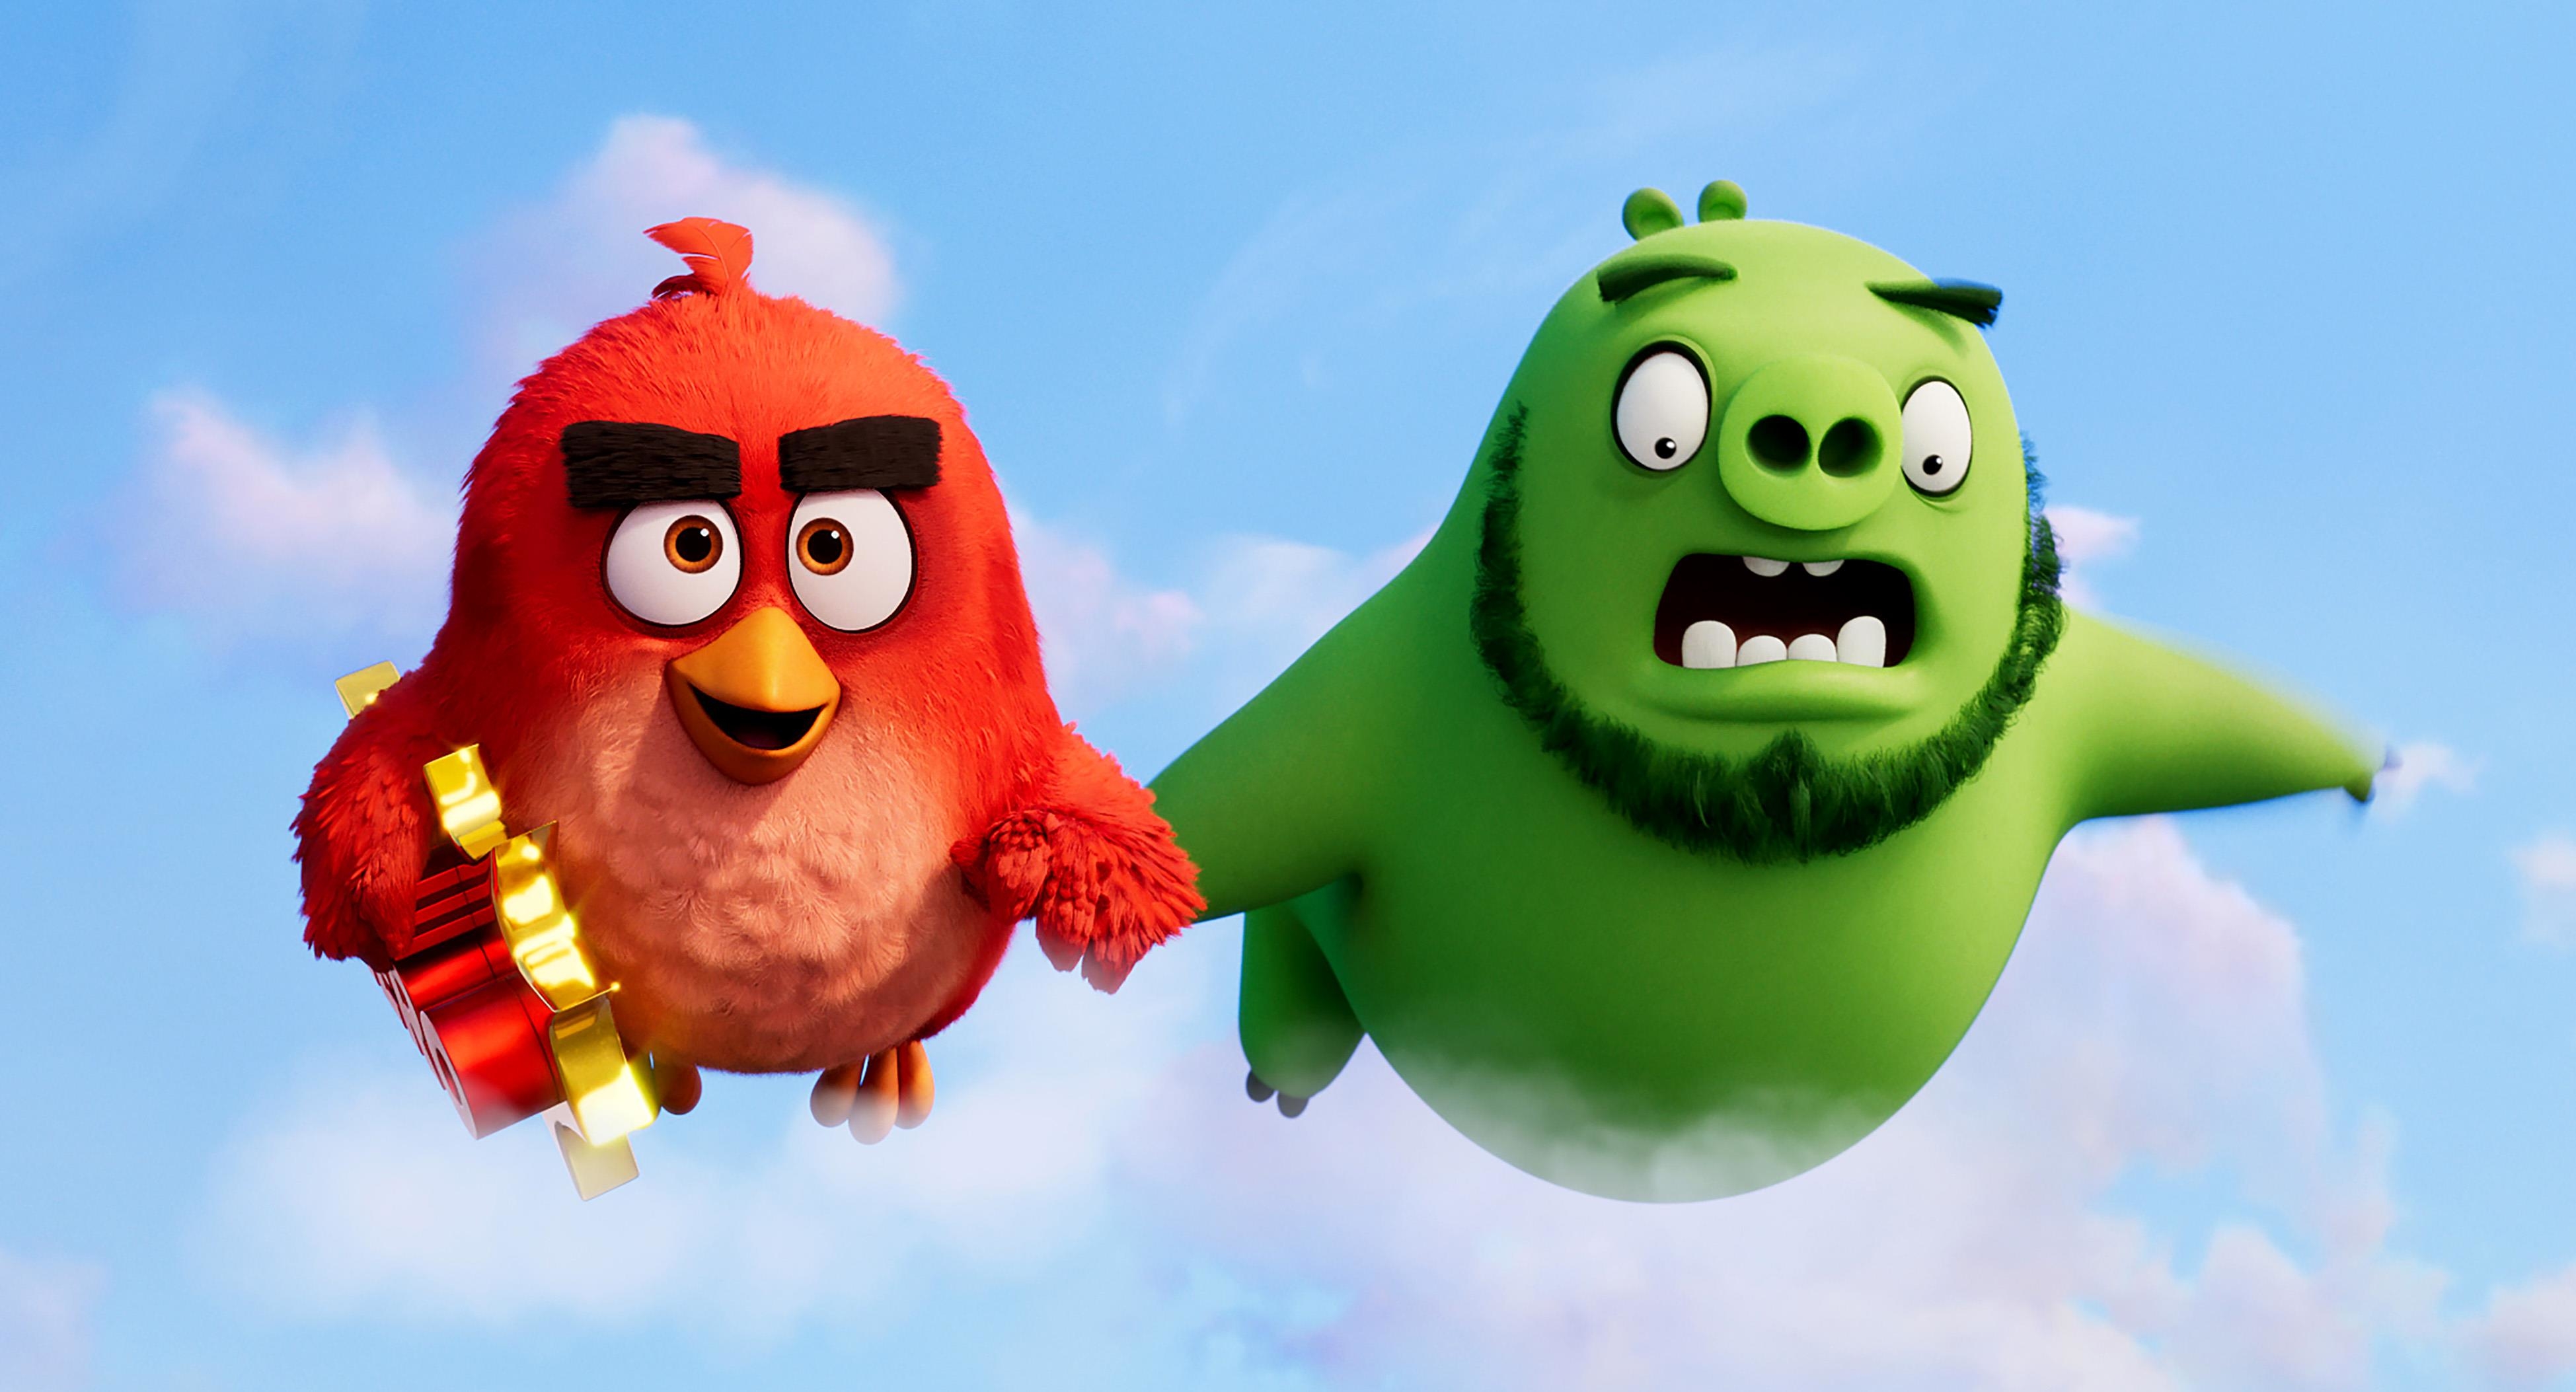 Image du film Angry Birds : copains comme cochons 6764ebfd-8891-4747-8909-2c6f2ad1cf17